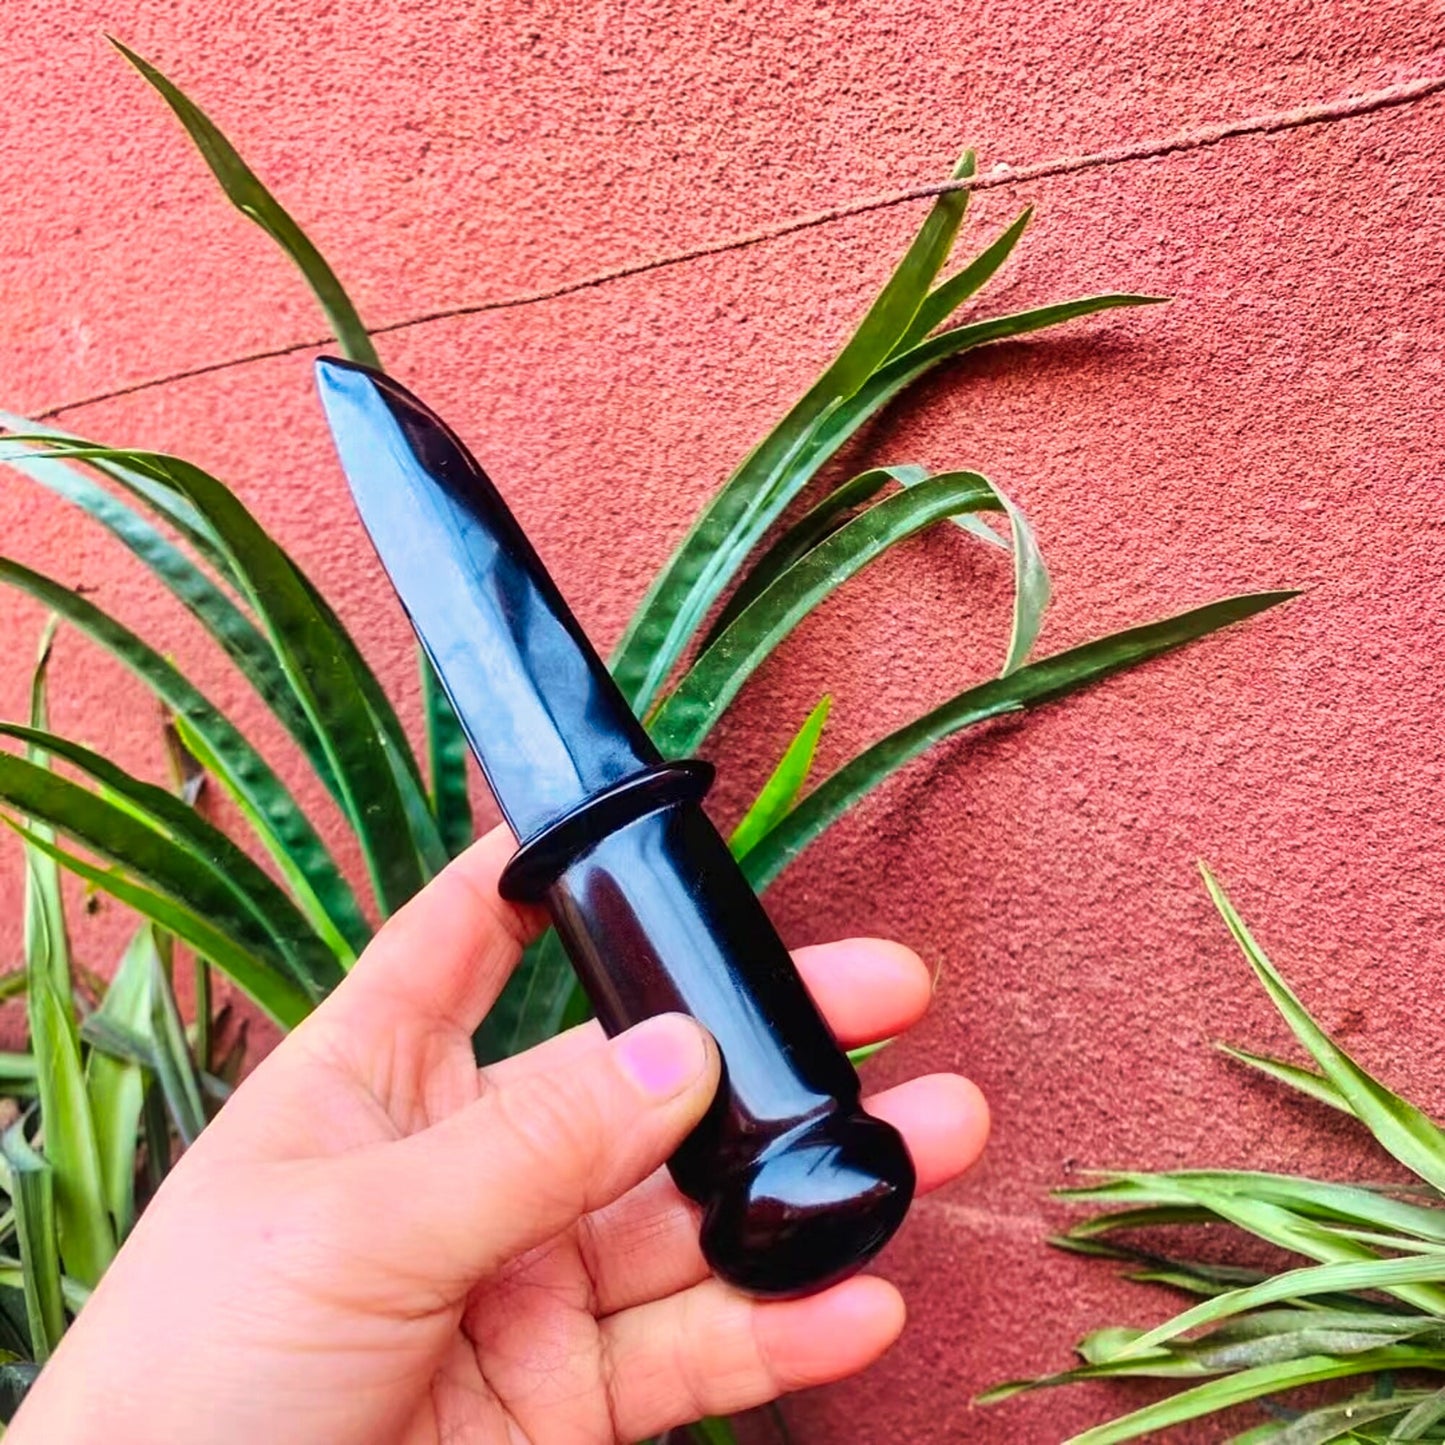 Handmade Natural Obsidian Dagger for Men - Healing Crystal Protection Stone, Magic Talisman Sword and Witch Supplies Ornaments Gift